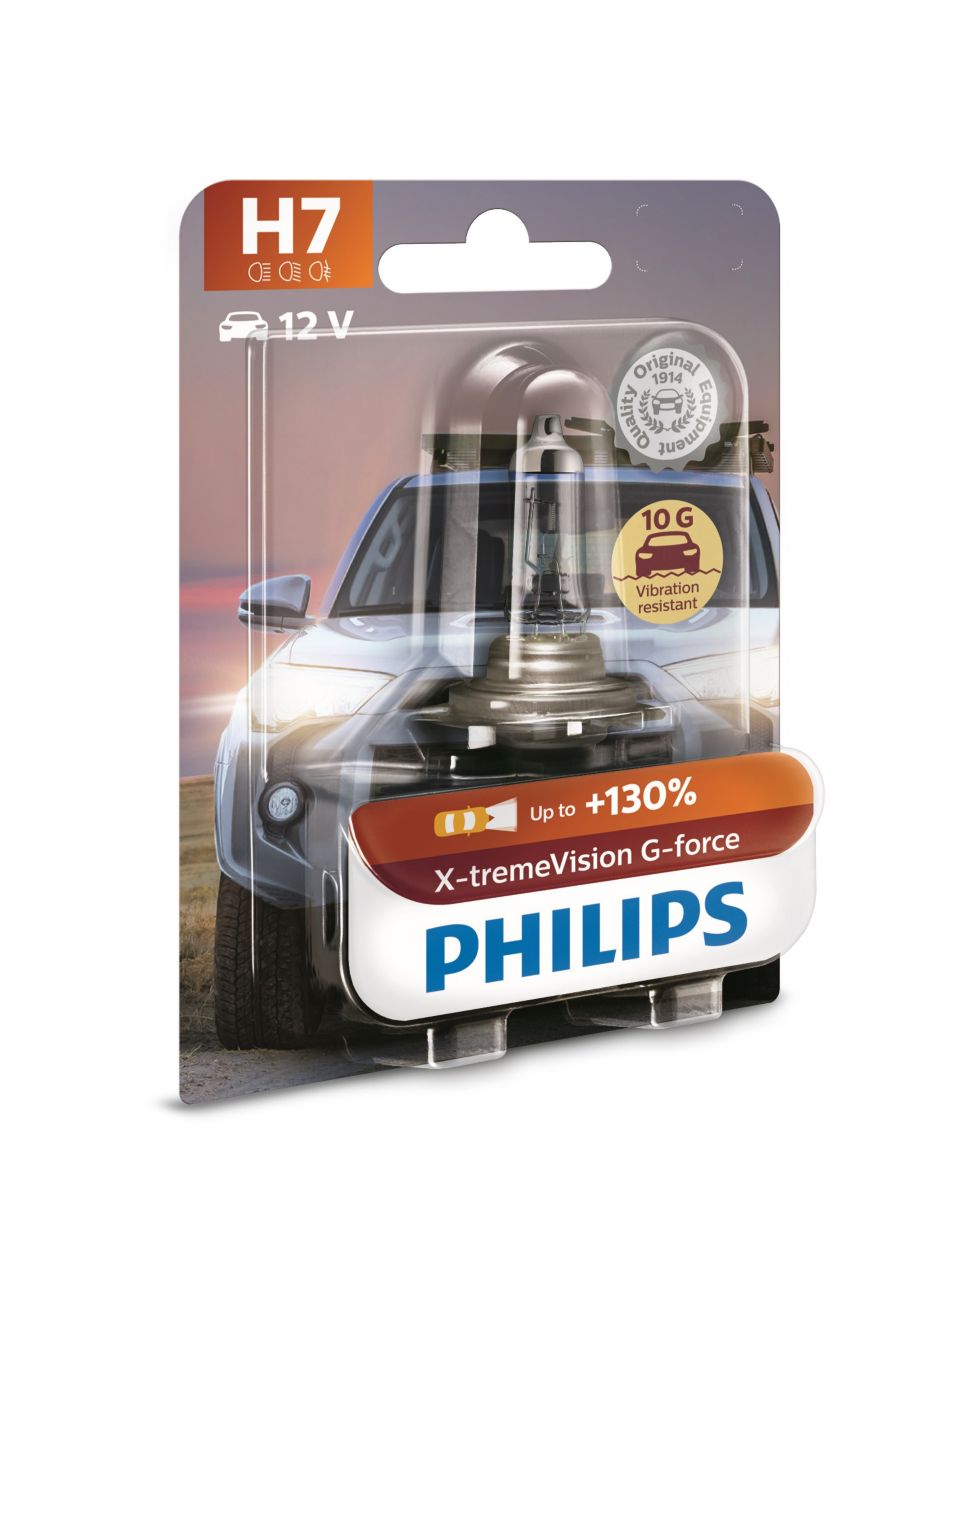 https://images.philips.com/is/image/philipsconsumer/bd1736705b55463c8a2cafaa0092703d?$jpglarge$&wid=960